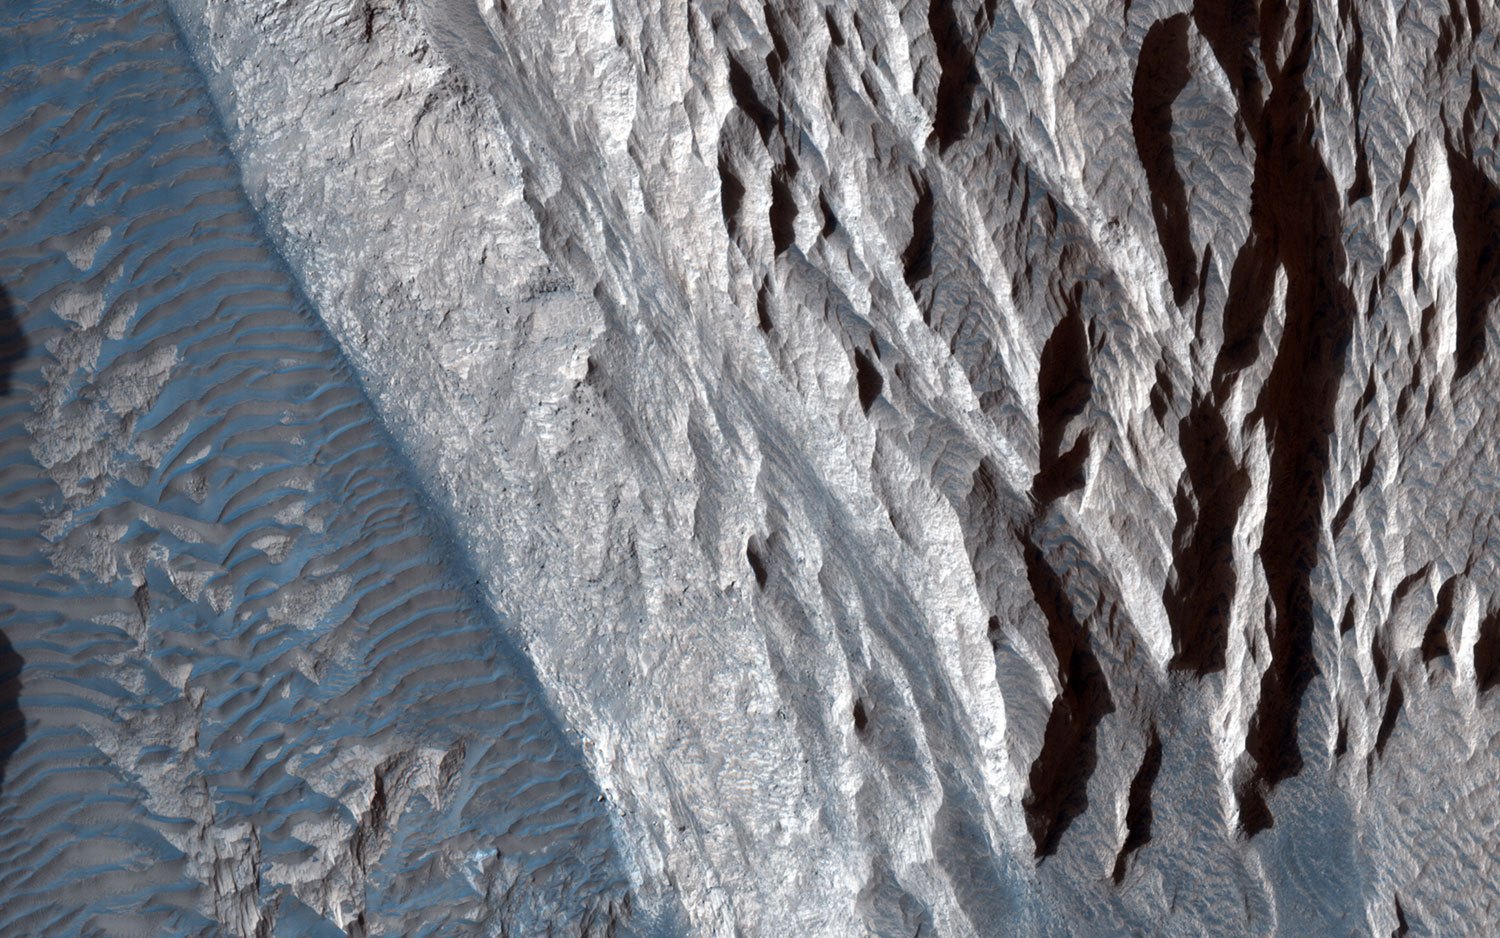 Sandstone cliffs and deposits of the mineral hematite cover portions of the Ophir Mensa on Mars. The lighter-toned areas are formed when downslope winds carve the fragile sandstone into channels. Over time, gravity works with the wind to erode material downslope and onto the canyon floor.